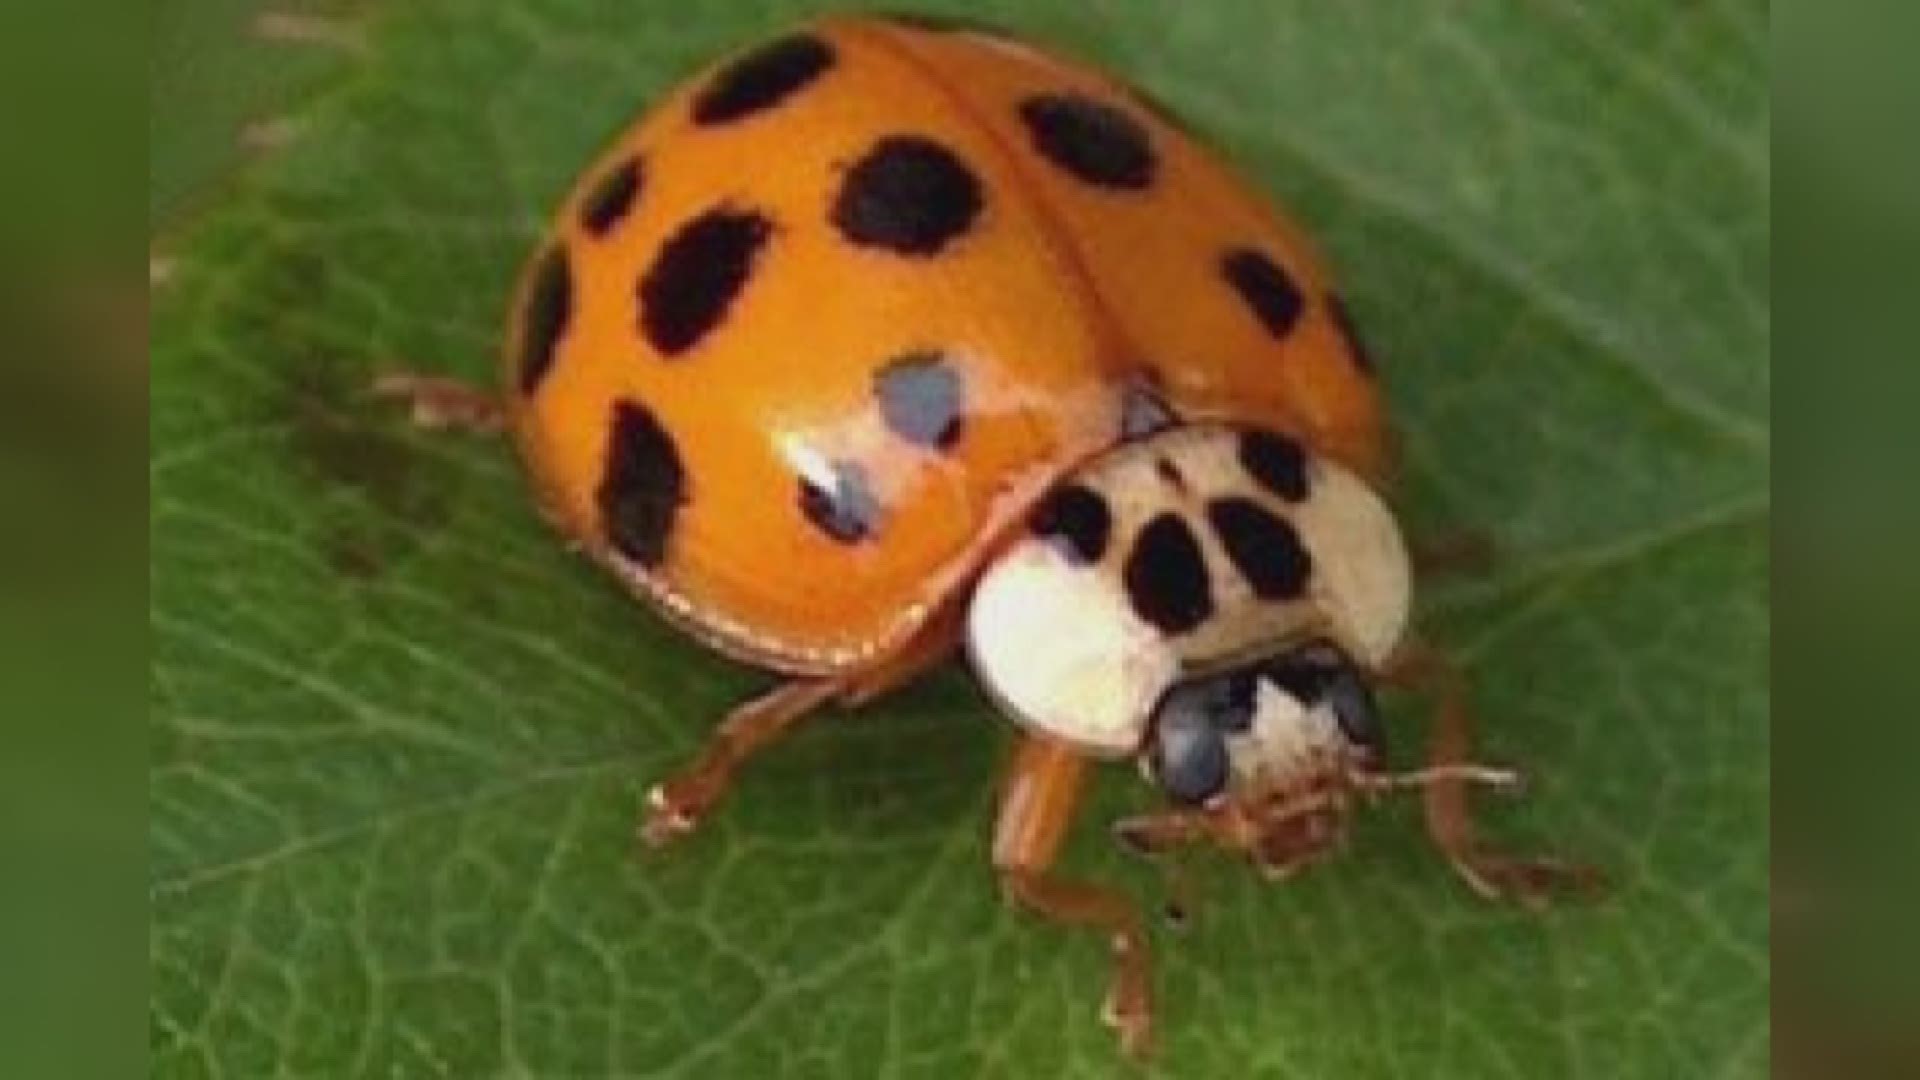 There is an invasion of the Asian Lady Beetle underway in South Louisiana. The weather has them on the move and in many unwanted places like homes, cars and even landing on people.